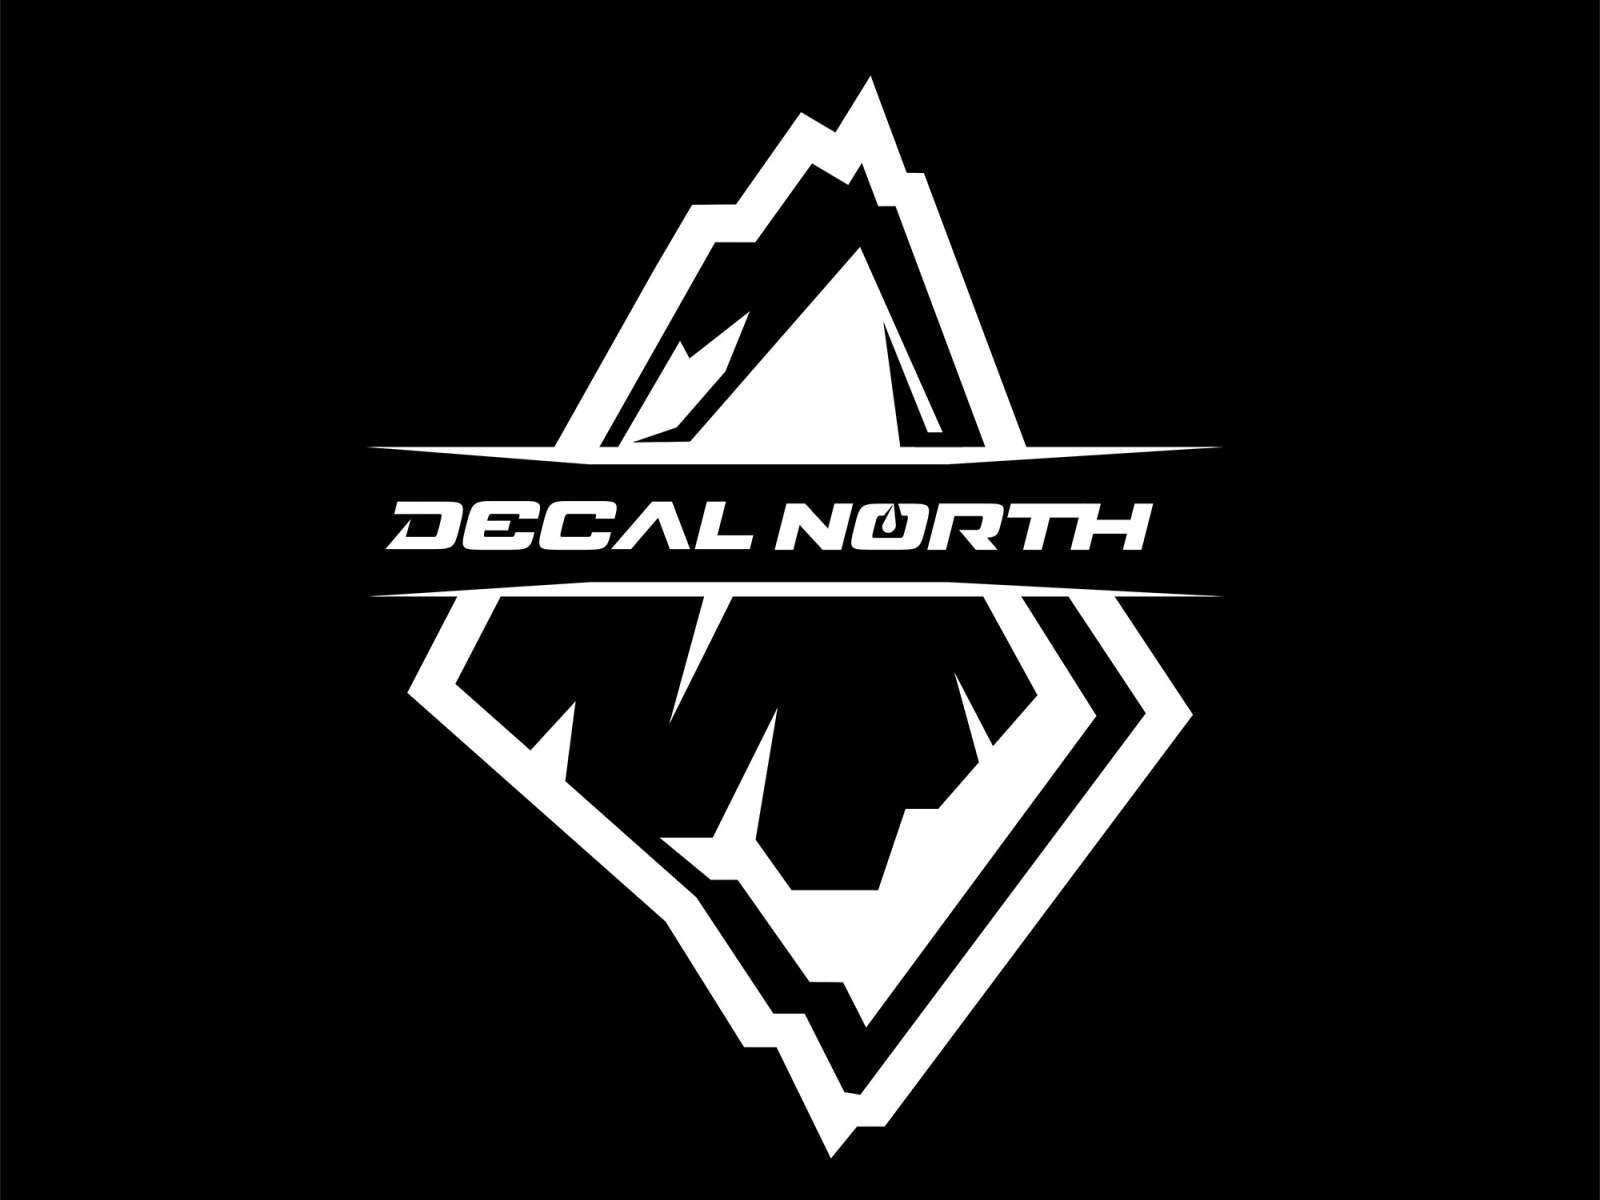 Decal North by F. Canarin on Dribbble